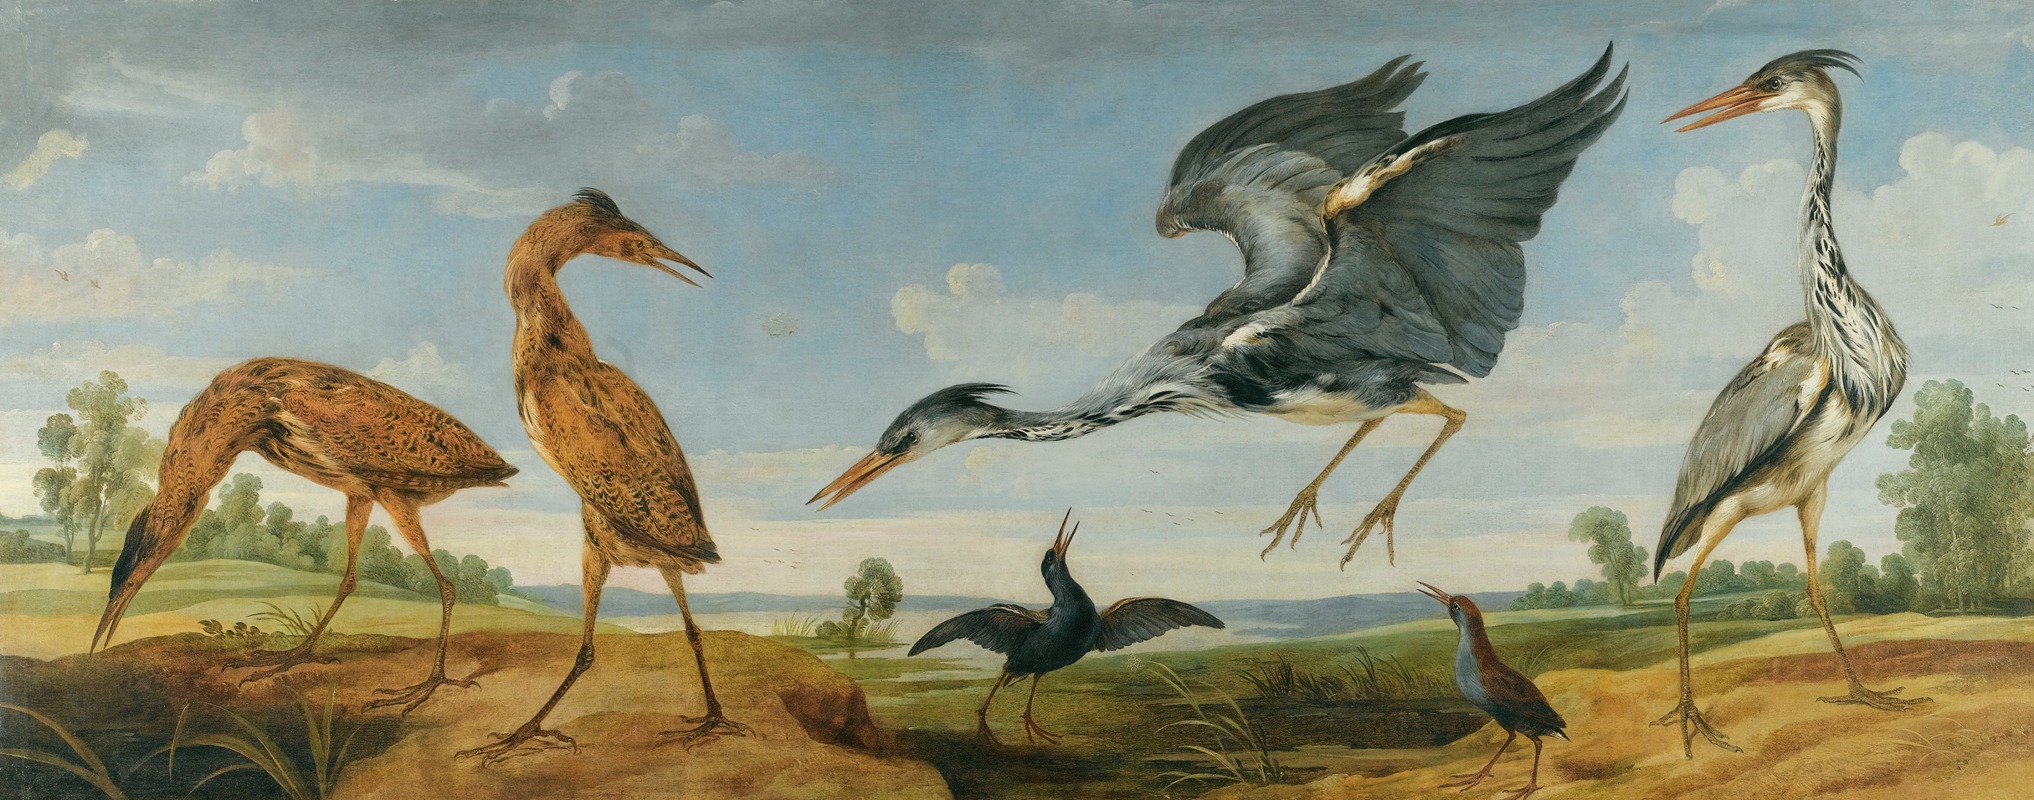 Paul de Vos - Landscape With Pairs Of Herons And Bitterns